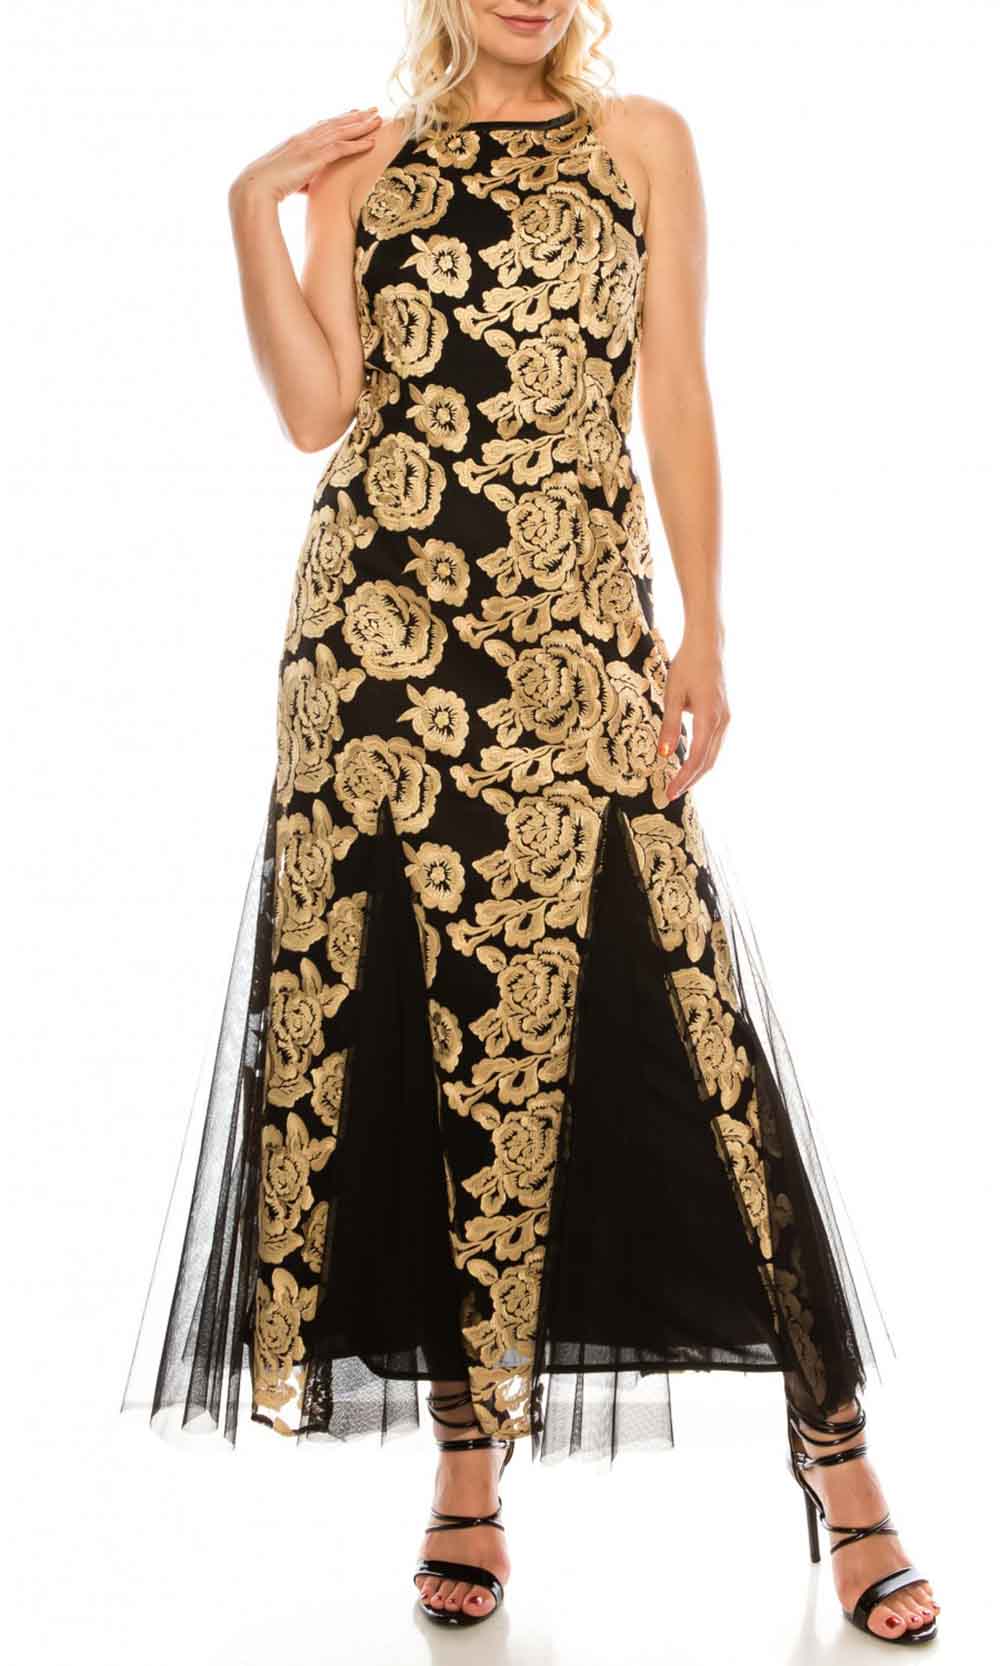 Alex Evenings - 8217673 Floral Embroidered Dress In Black and Gold